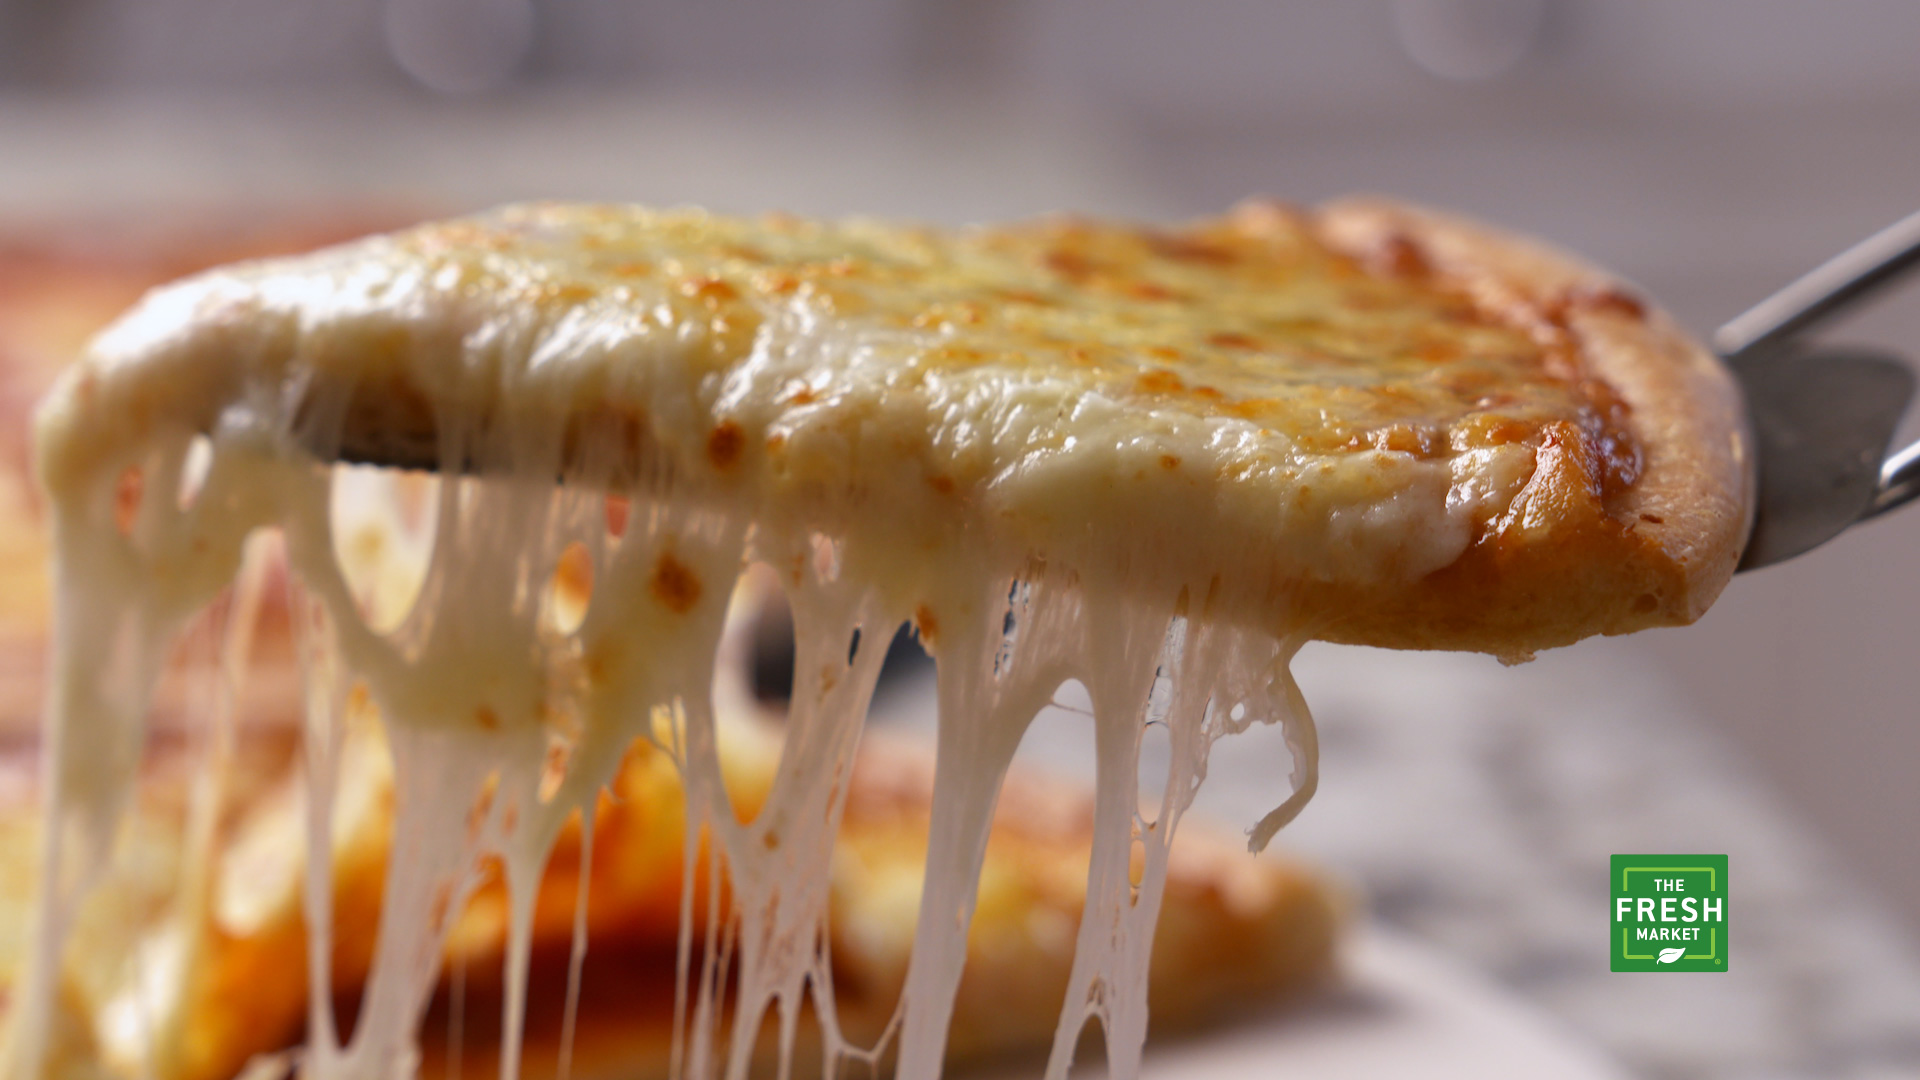 Hot cheesy pizza by K2 Productions Photography